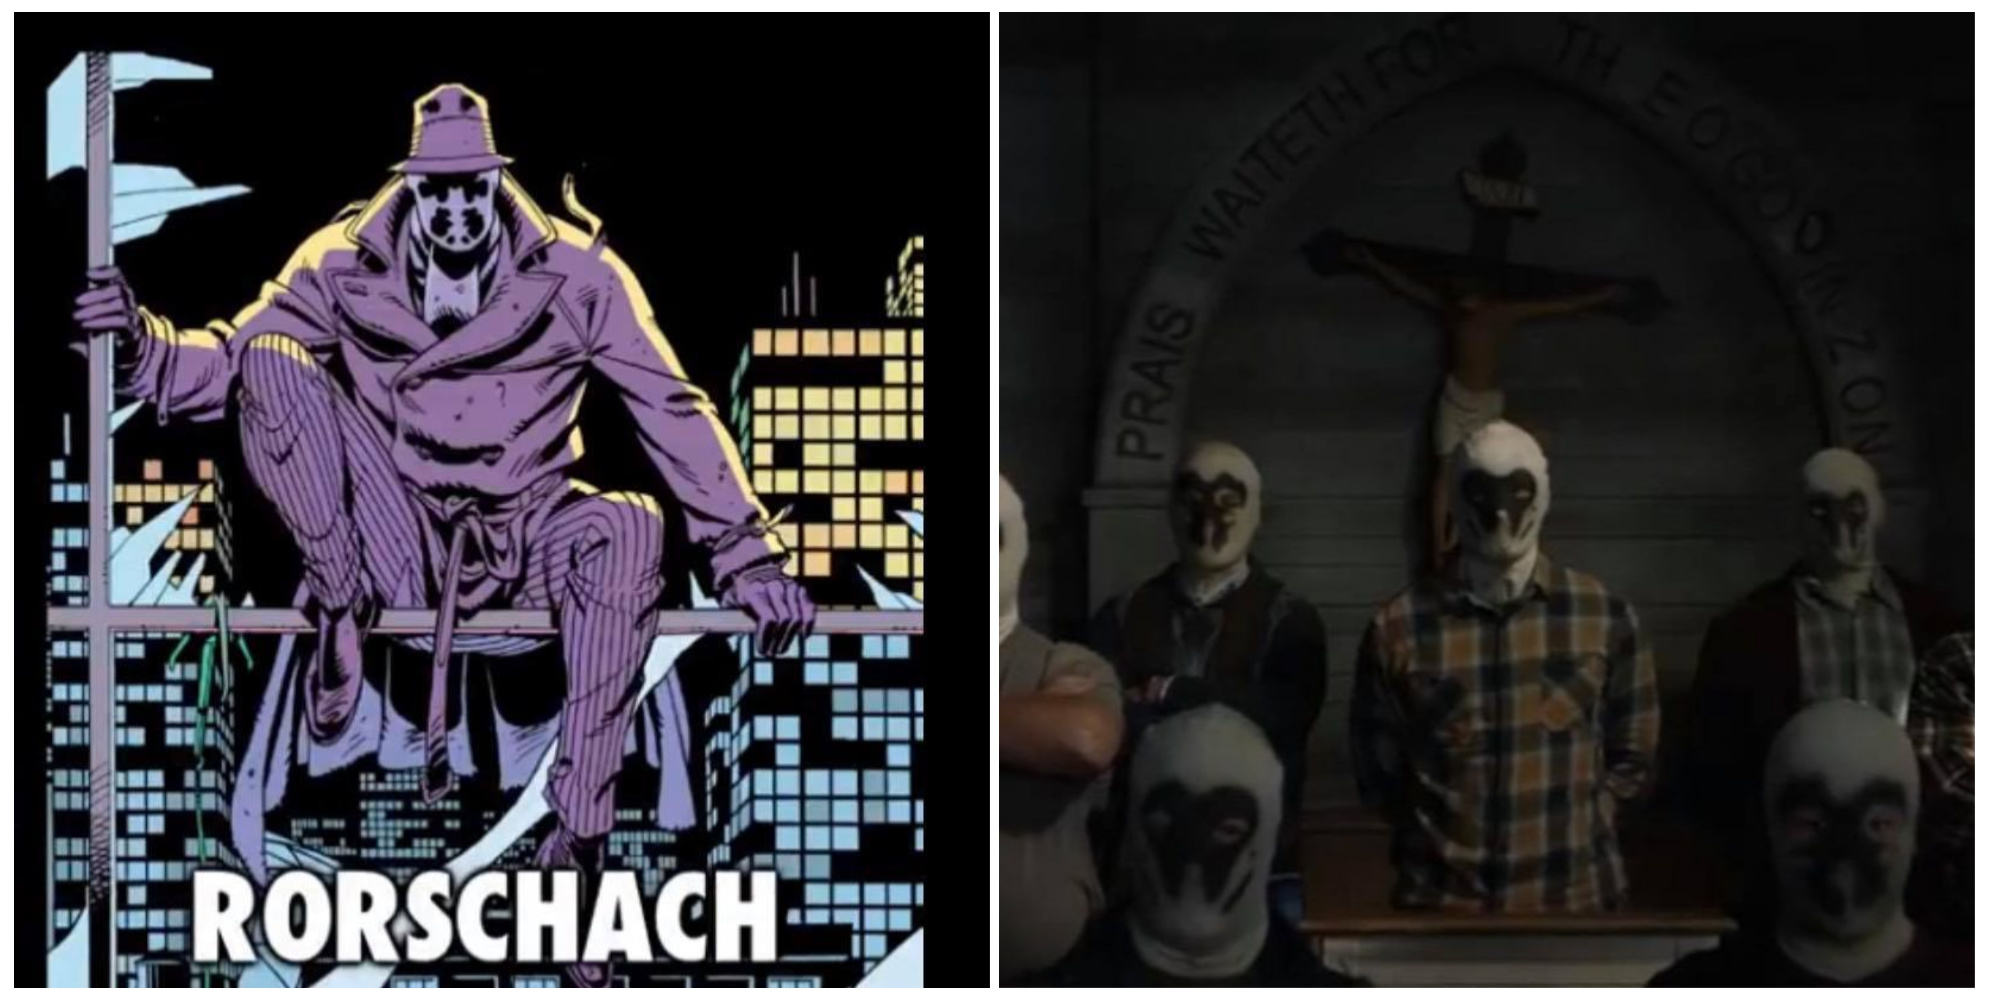 HBO’s Upcoming ‘Watchmen’ Has a Chance to Disavow Fascism. Will It?